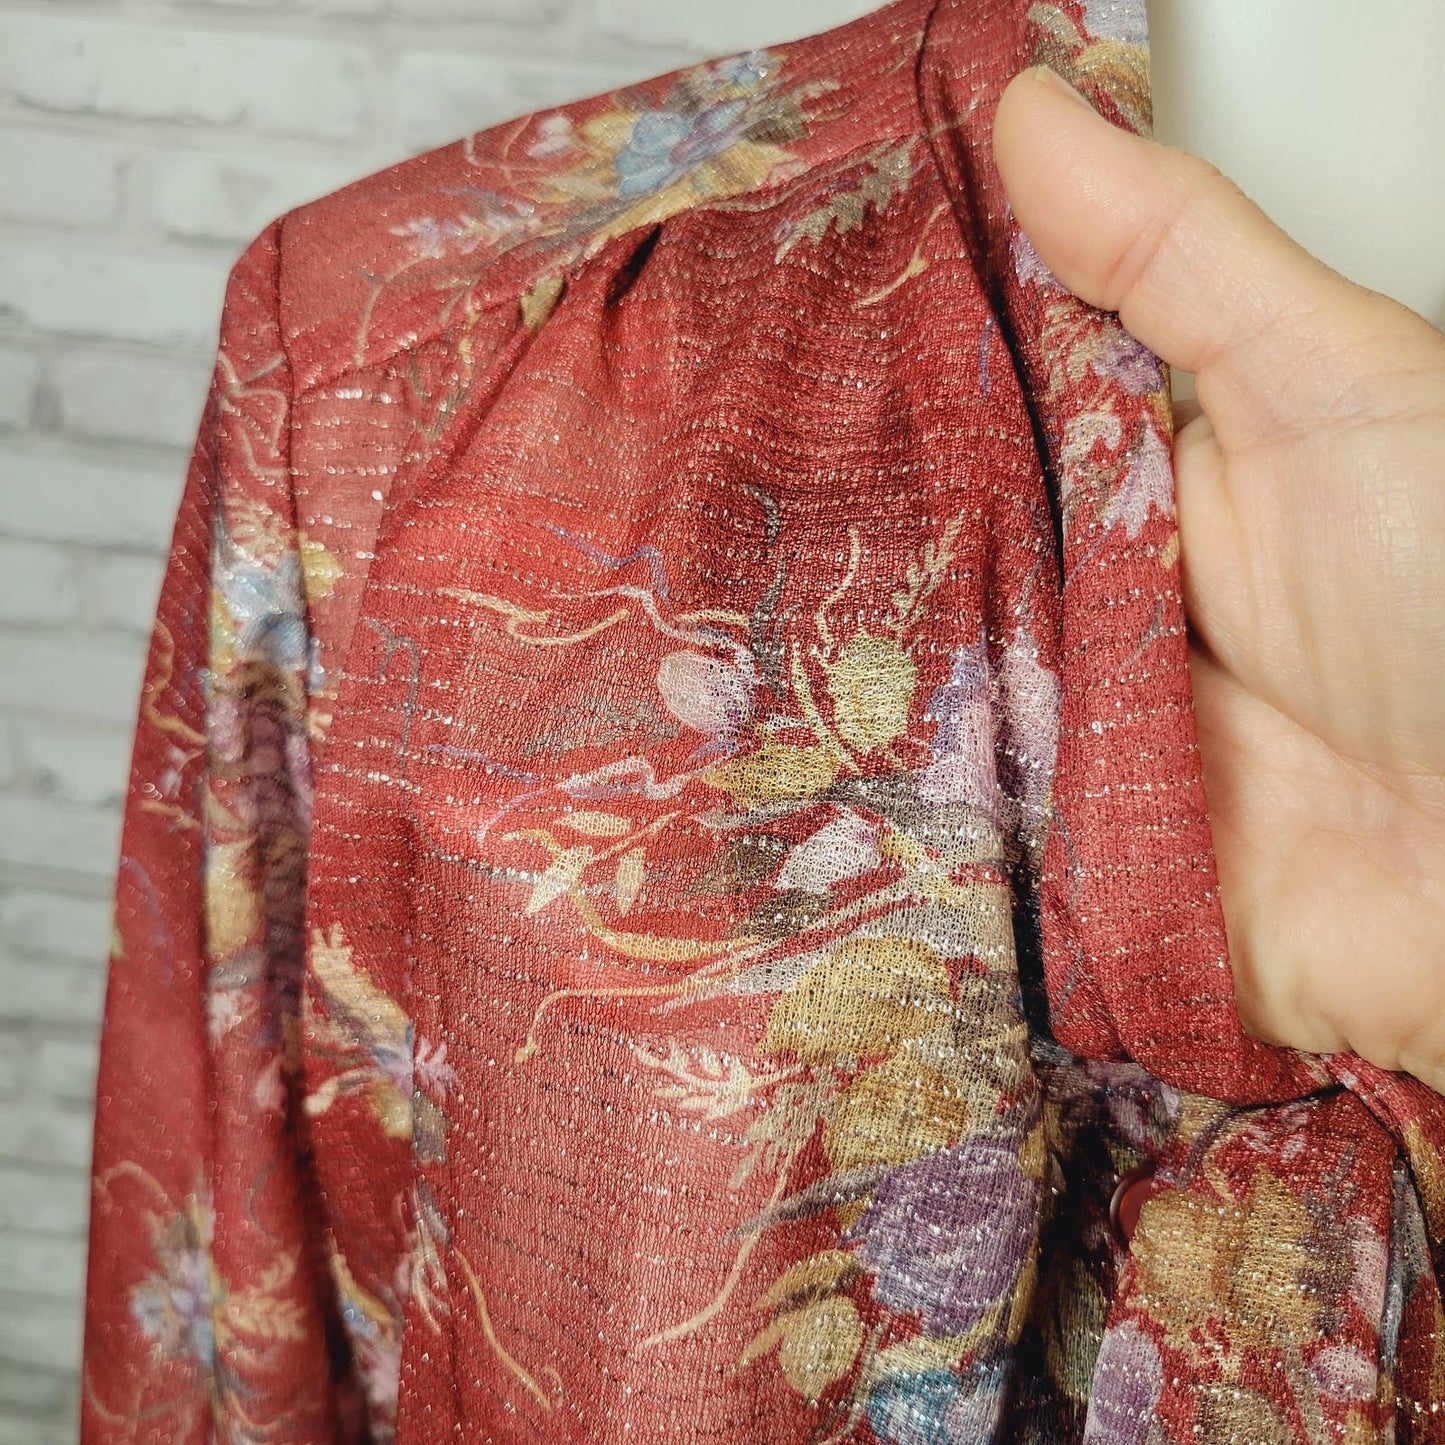 Secretary bow blouse size 14 Prince of Dallas semi-sheer rust floral 1970s vintage